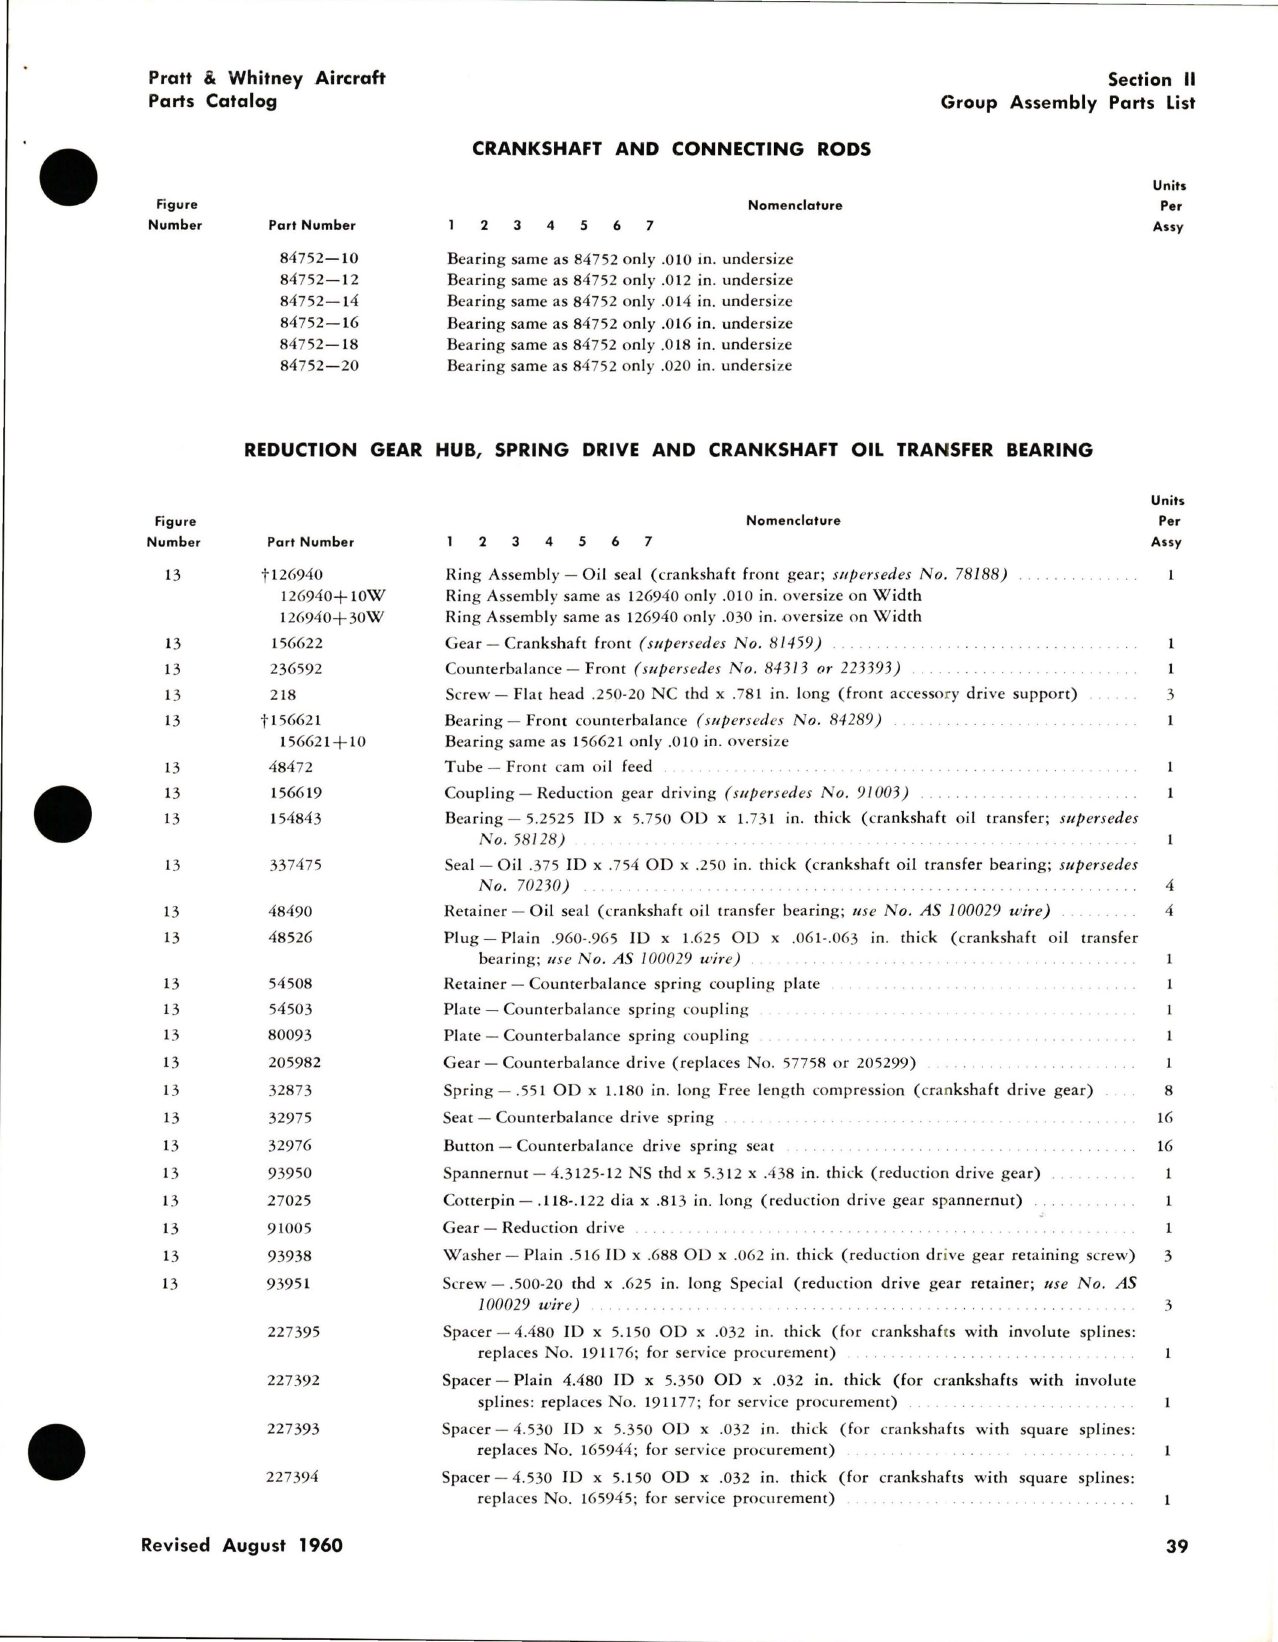 Sample page 5 from AirCorps Library document: Parts Catalog Revision for Double Wasp - CA3, CA15, CA18, CB3, CB16 & CB17 Engines - Part 119472